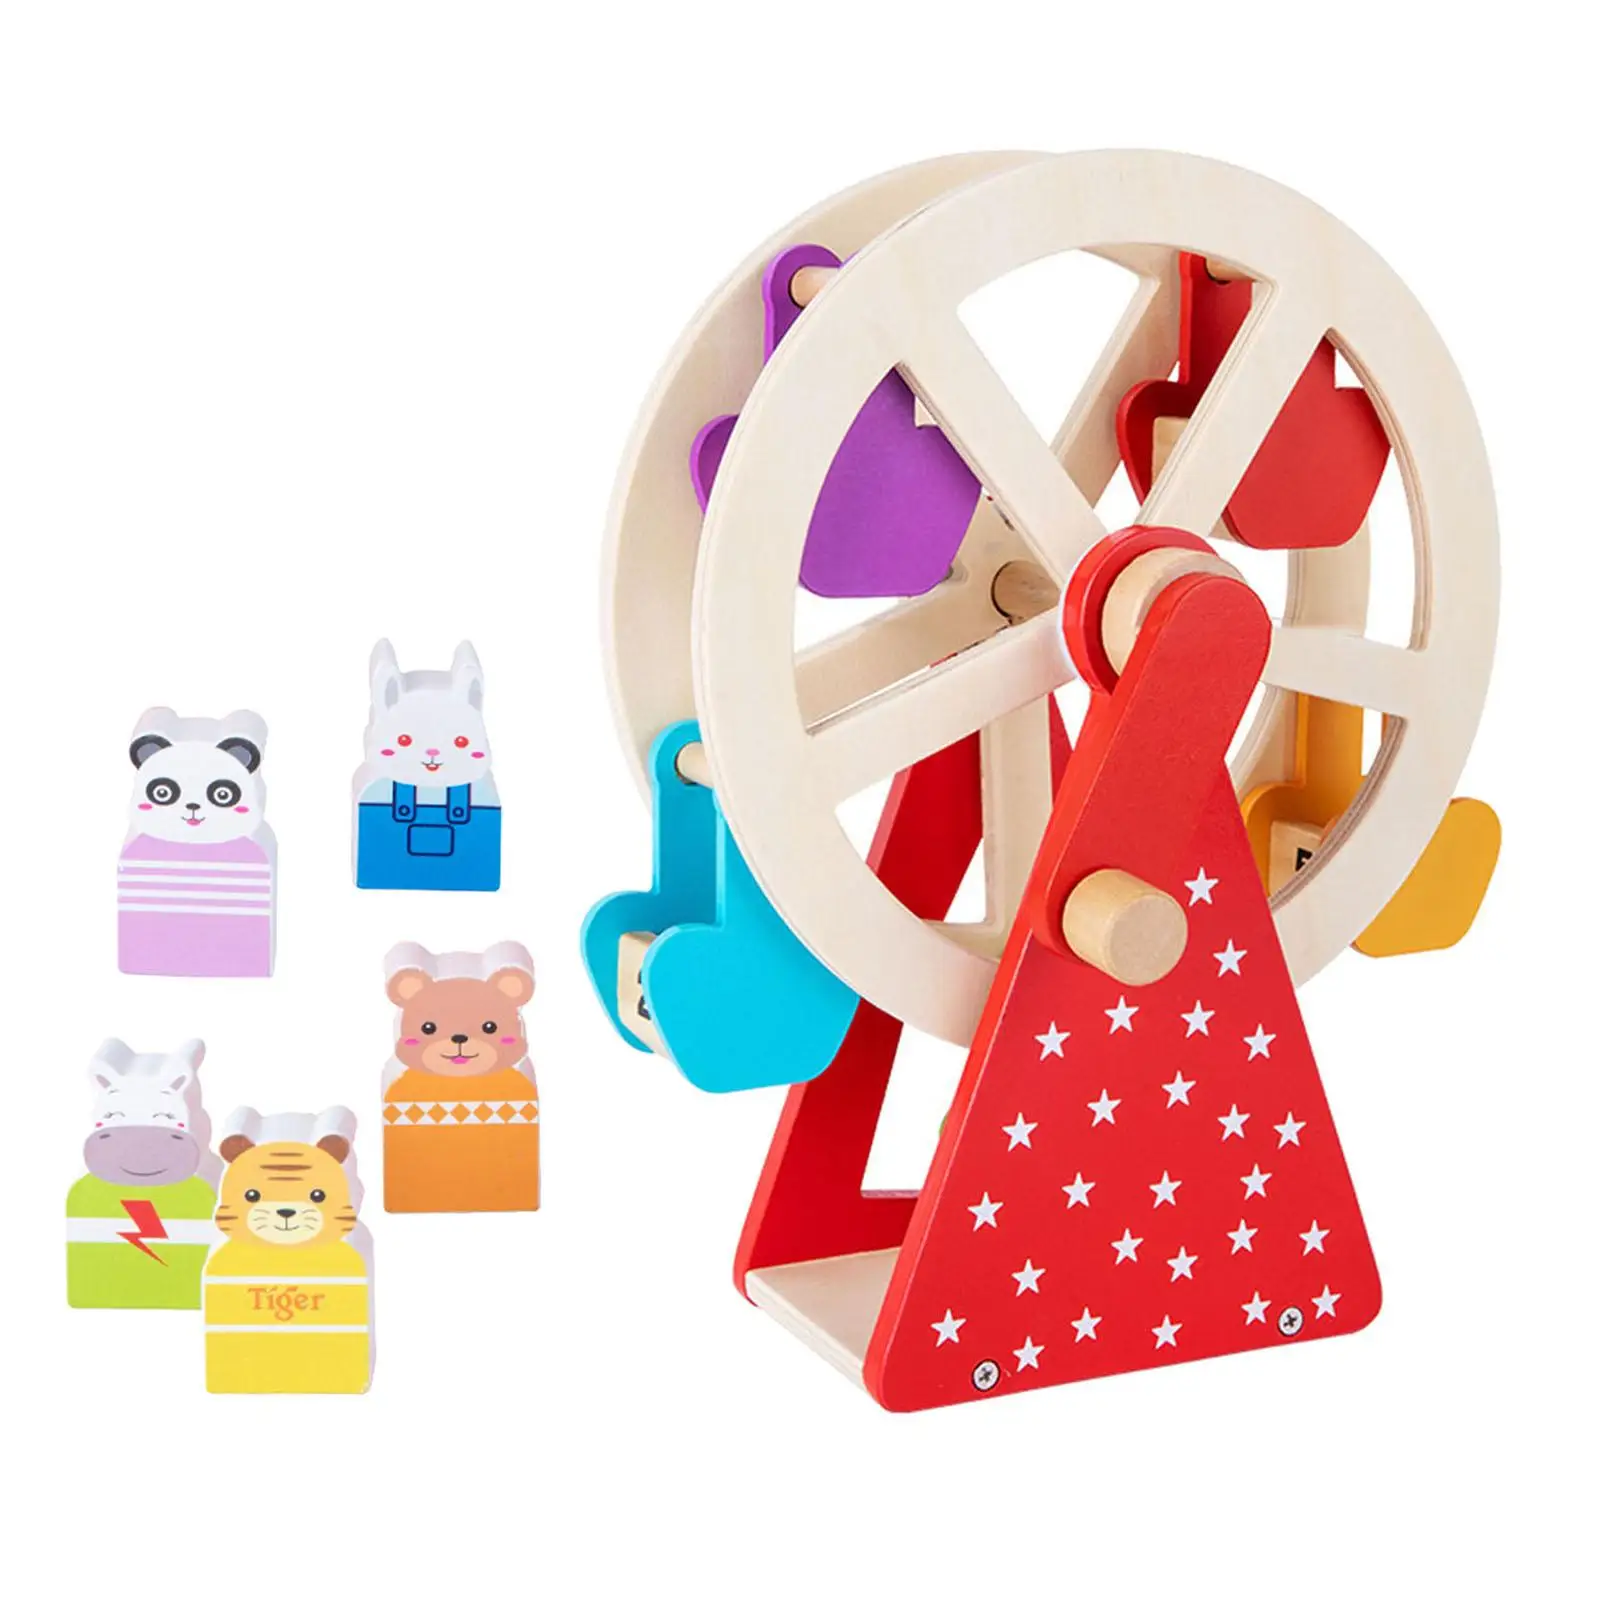 Kids Rotating Wheel Toys Assembly W/ Animal Blocks 3D W/ Handle Handheld DIY Colorful  for 3+ Years Old Infant  Gifts